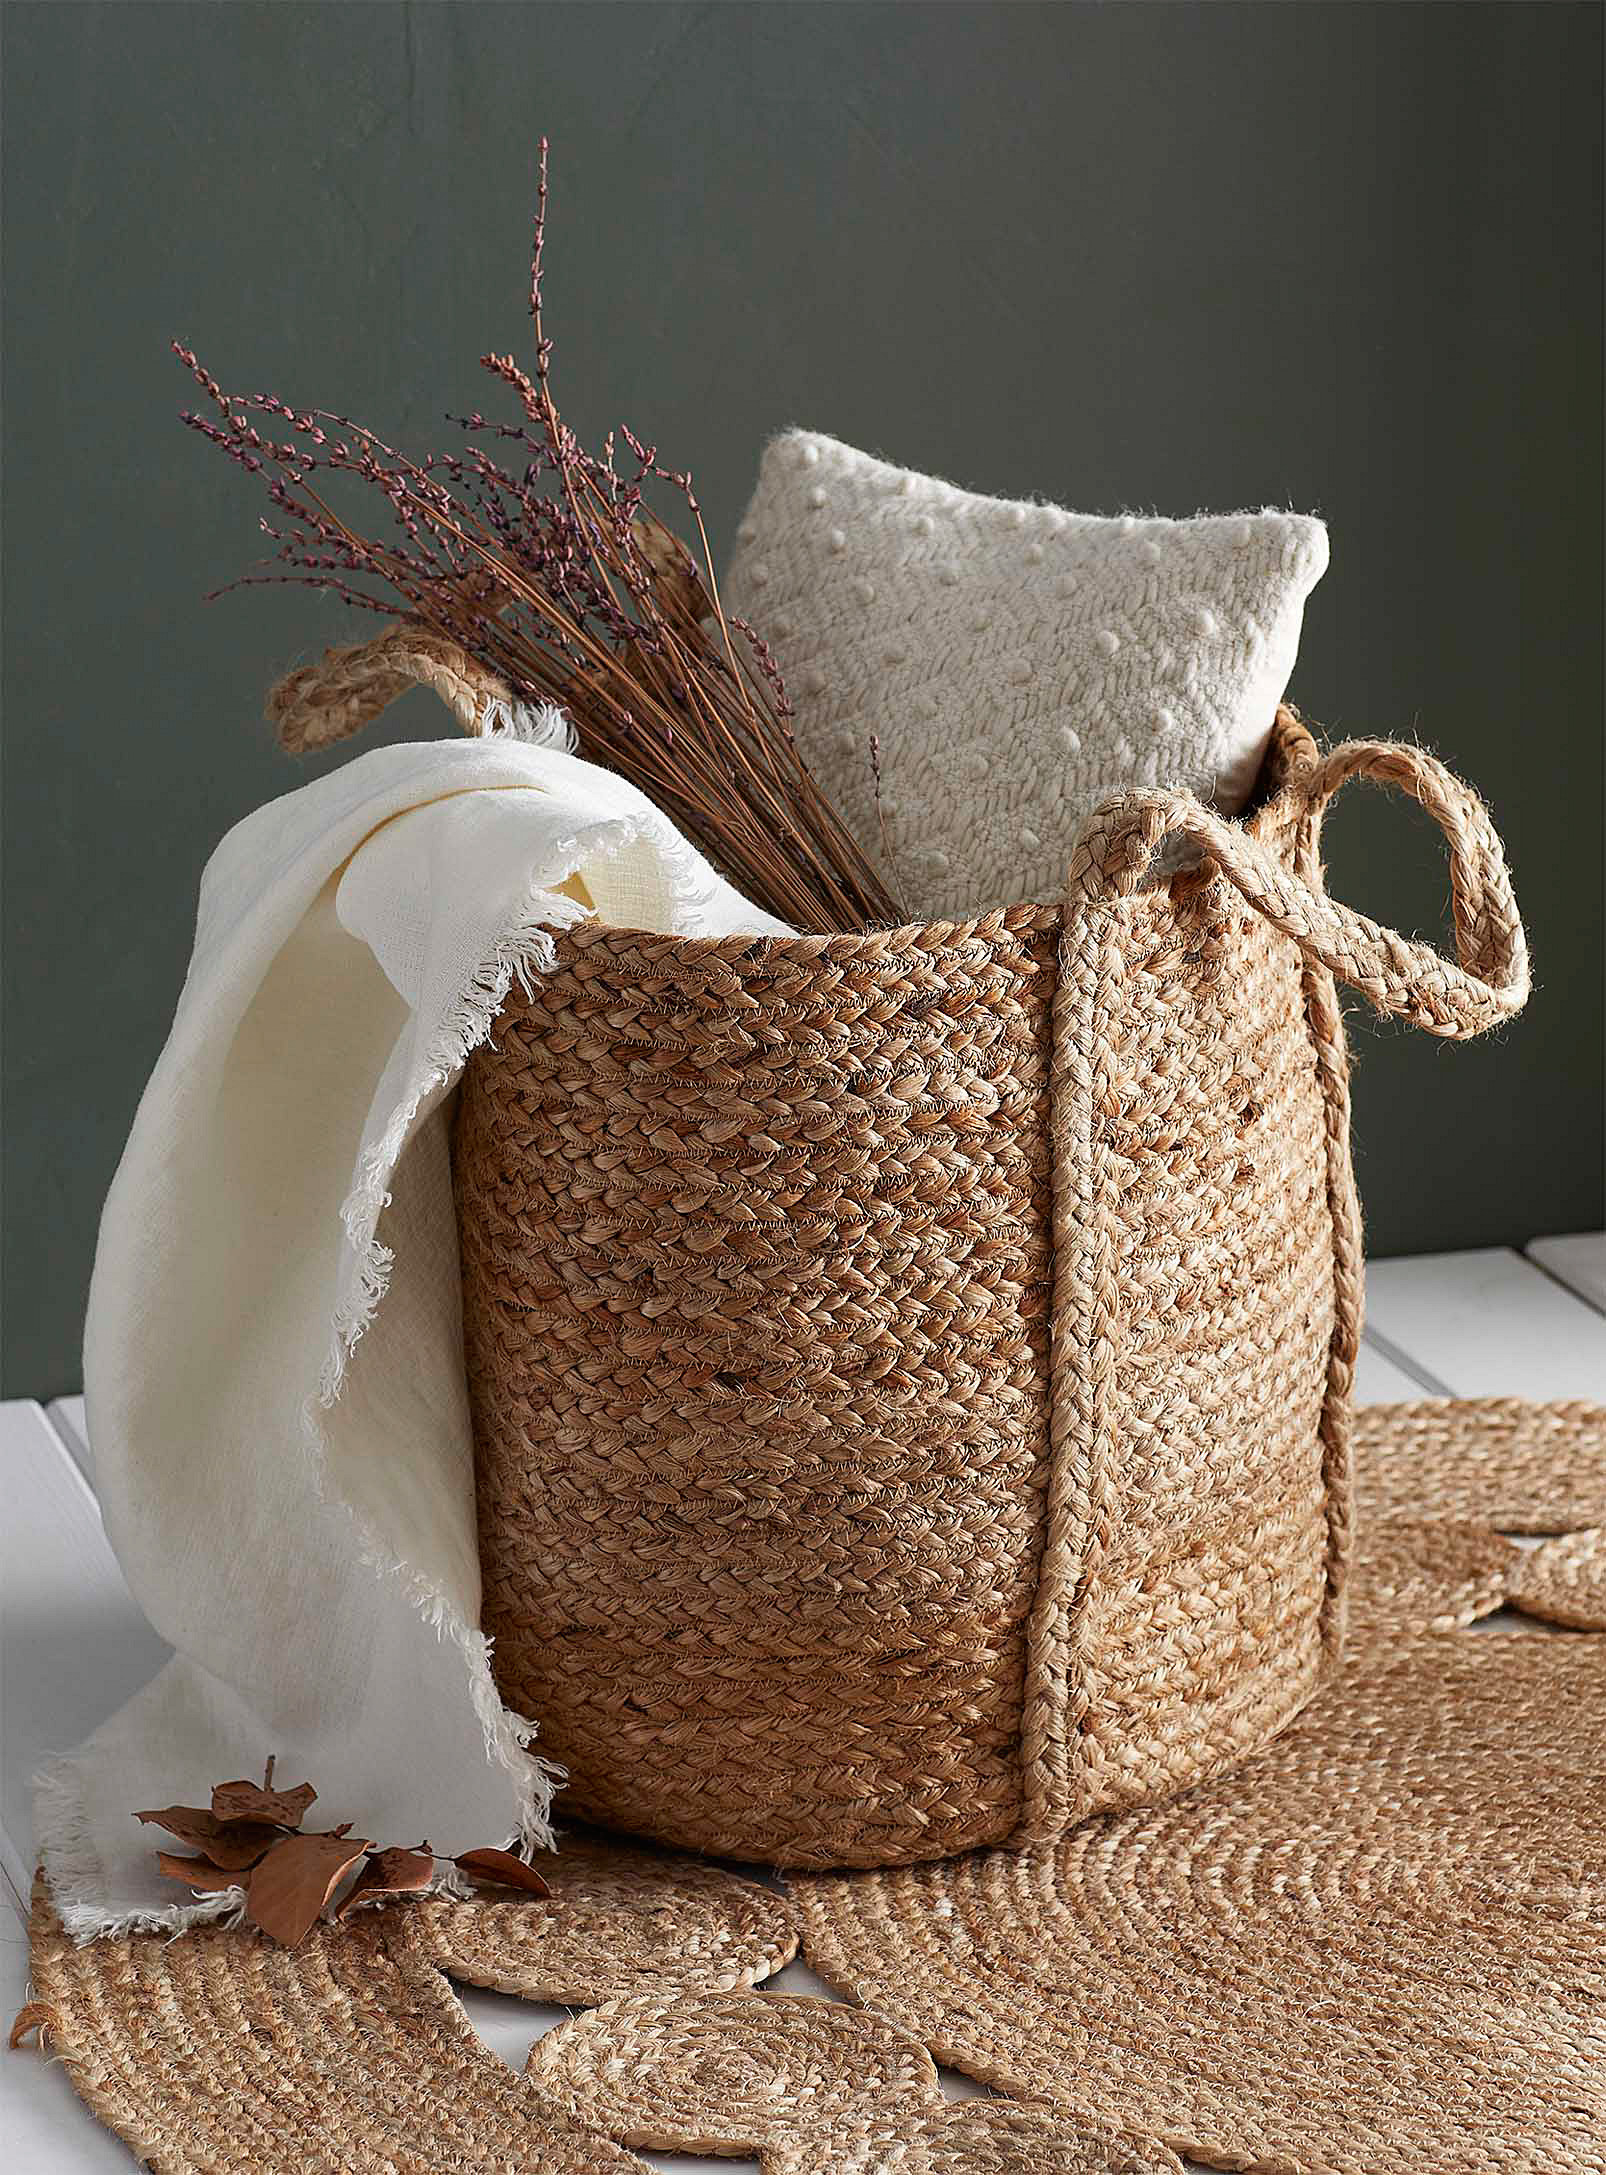 A woven basket filled with pillows, blankets, and dried flowers